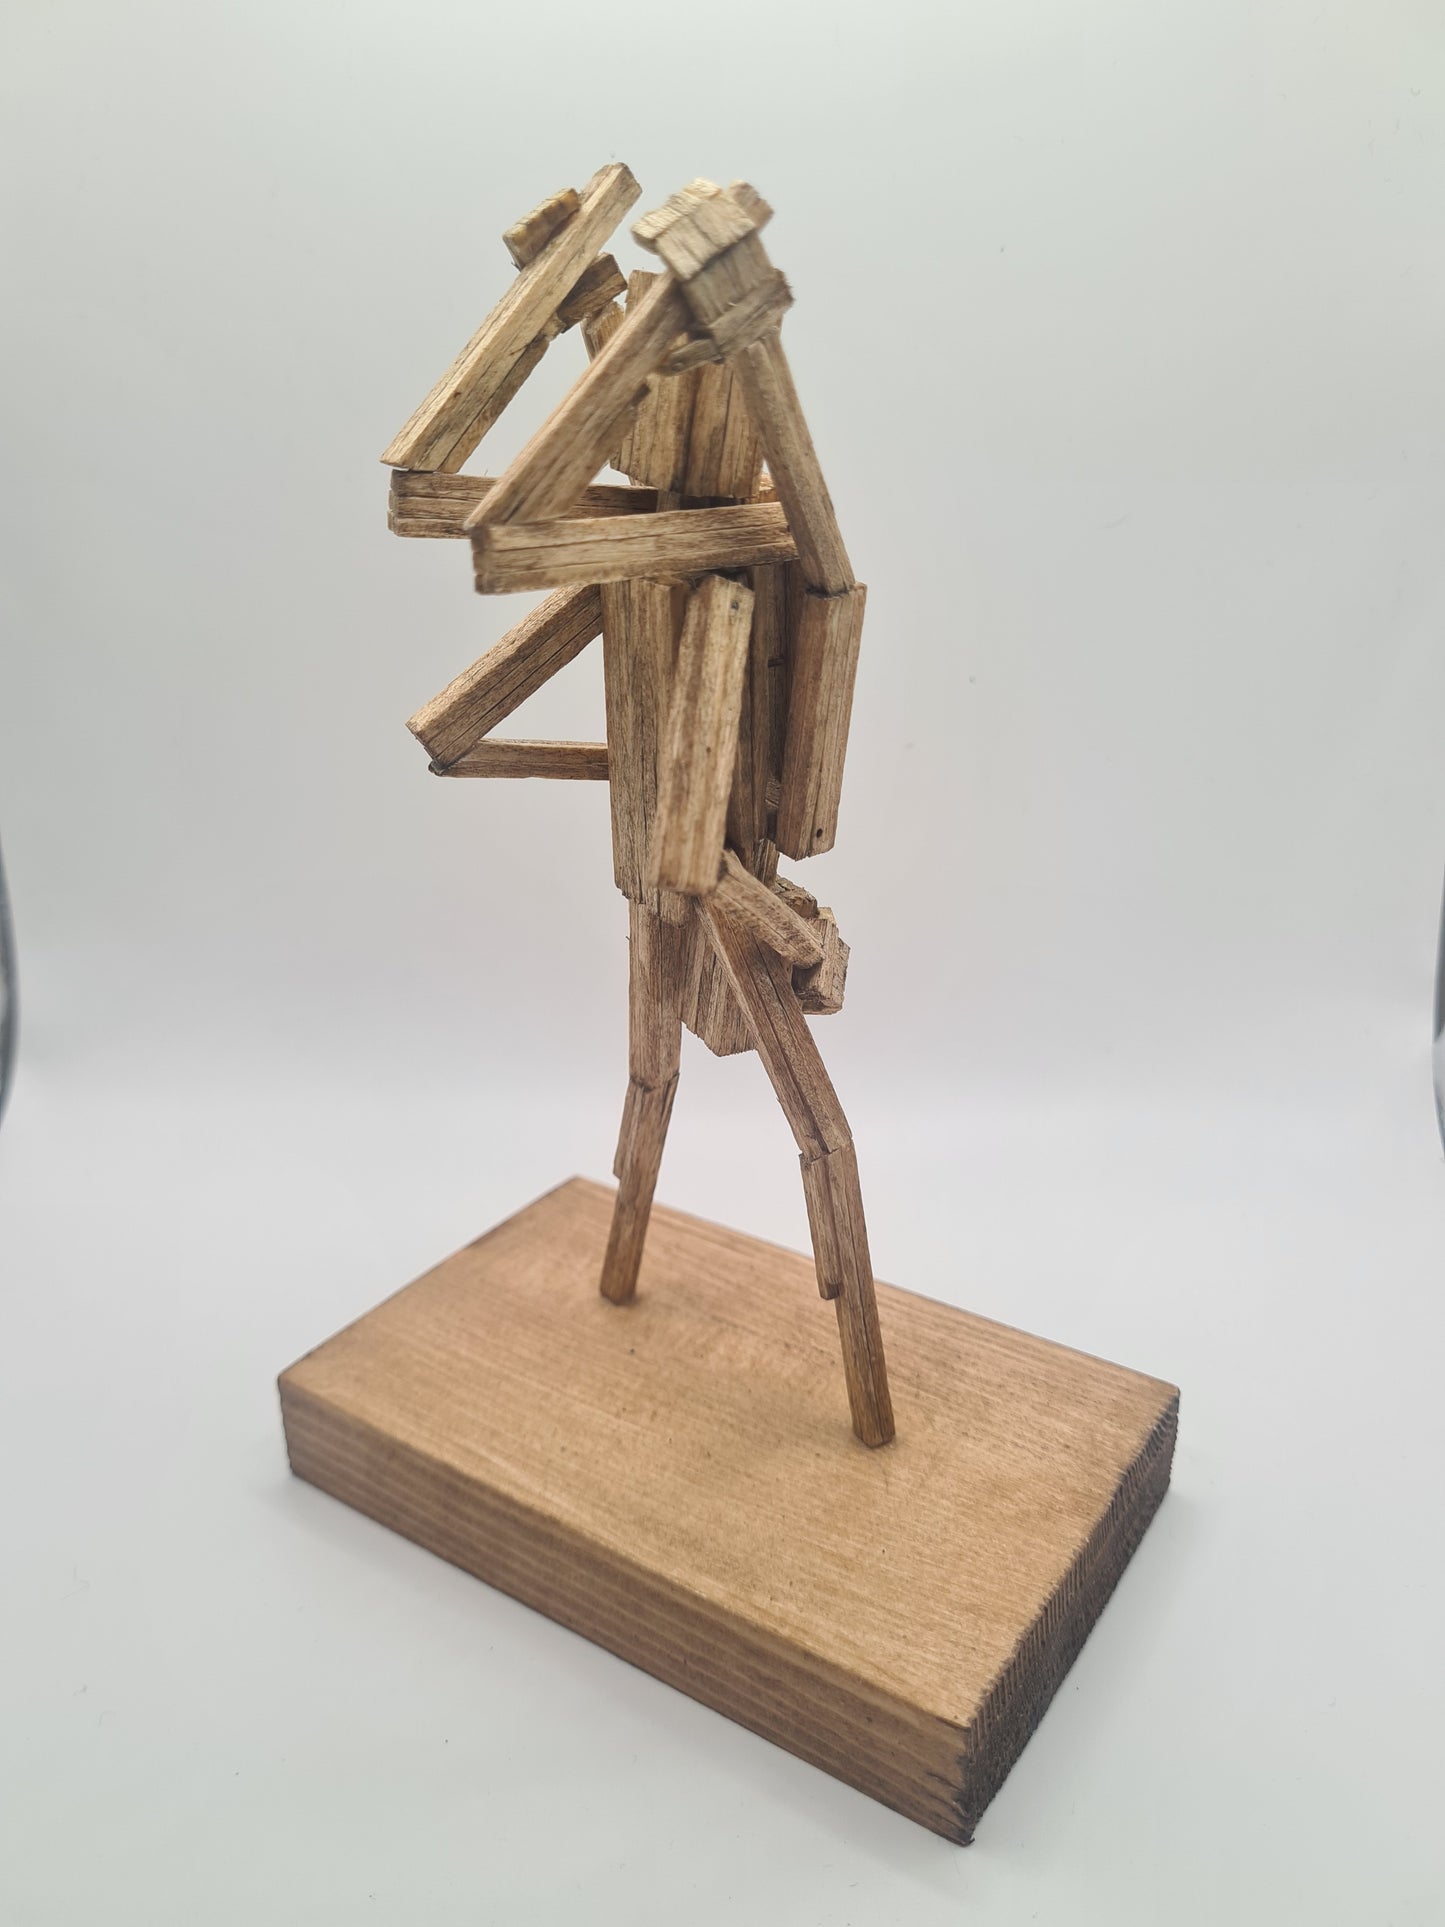 Standing 69 - Handcrafted Wooden Matchstick Figures - Gifts, Ornaments and Decor By Tiggidy Designs